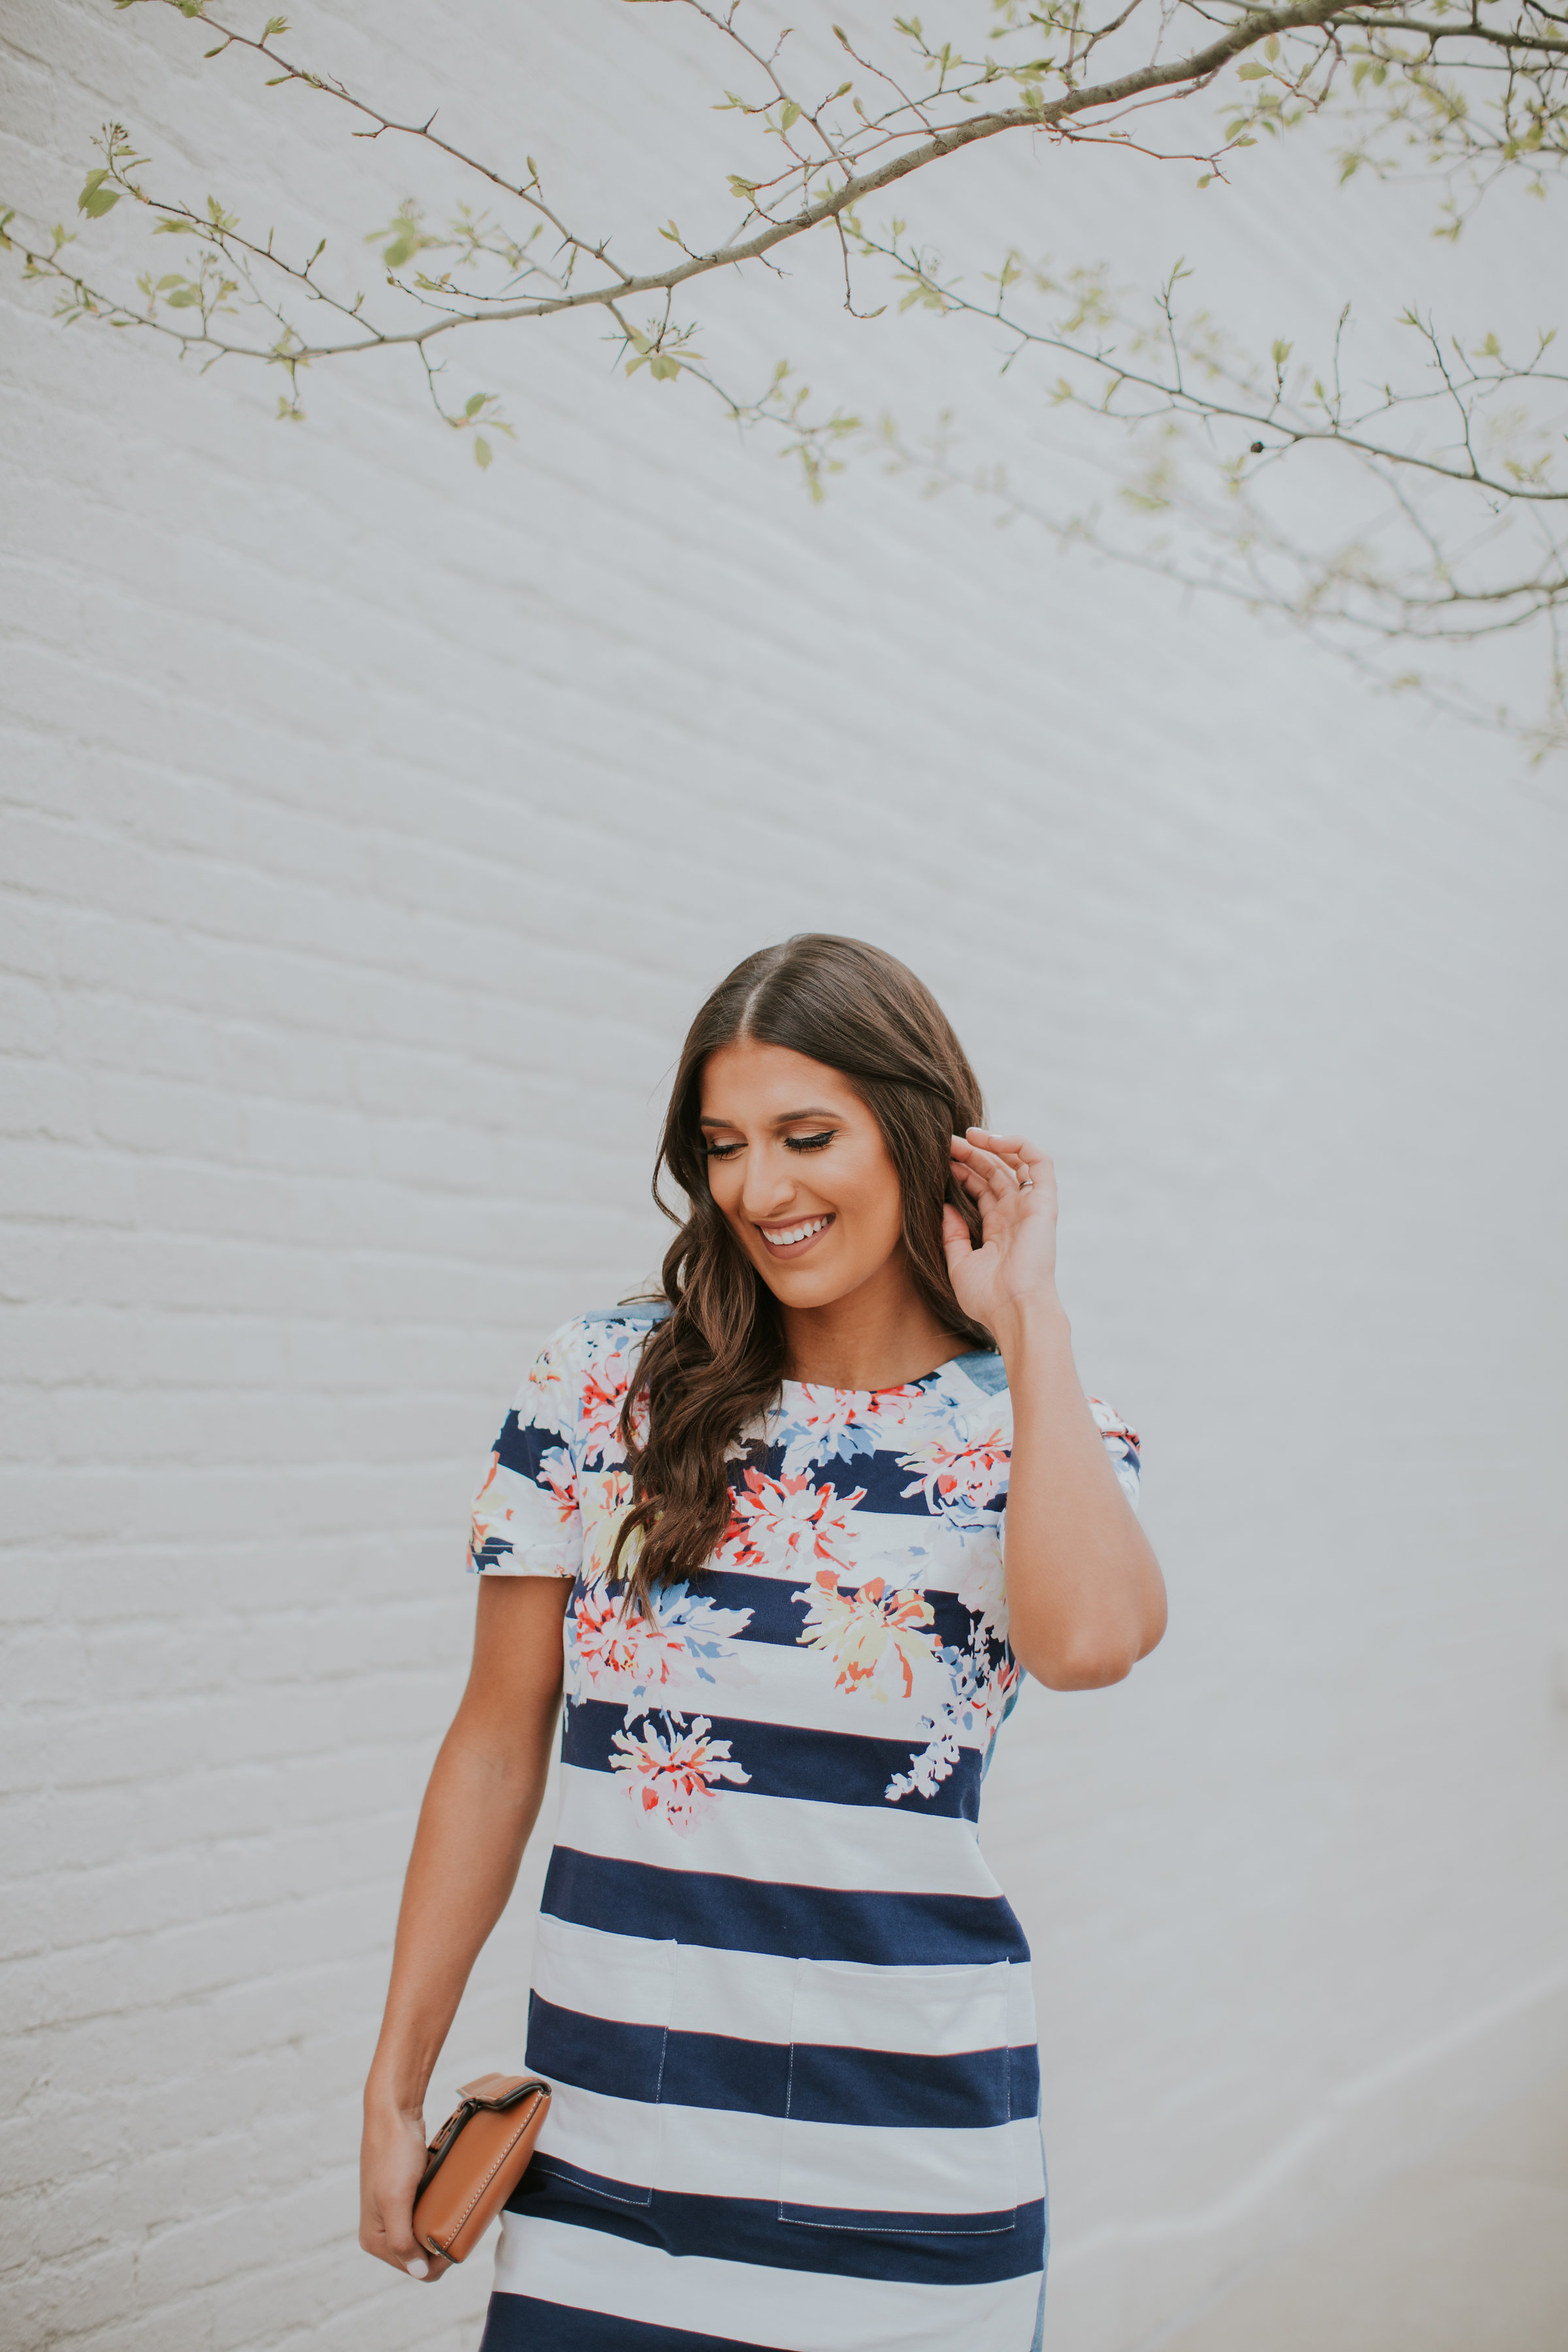 joules clothing, joules x dillards launch, joules usa, joules mini cooper, joules event, dillards joules, louisville dillards, dillards st matthews, a southern drawl meet and greet louisville // grace wainwright a southern drawl